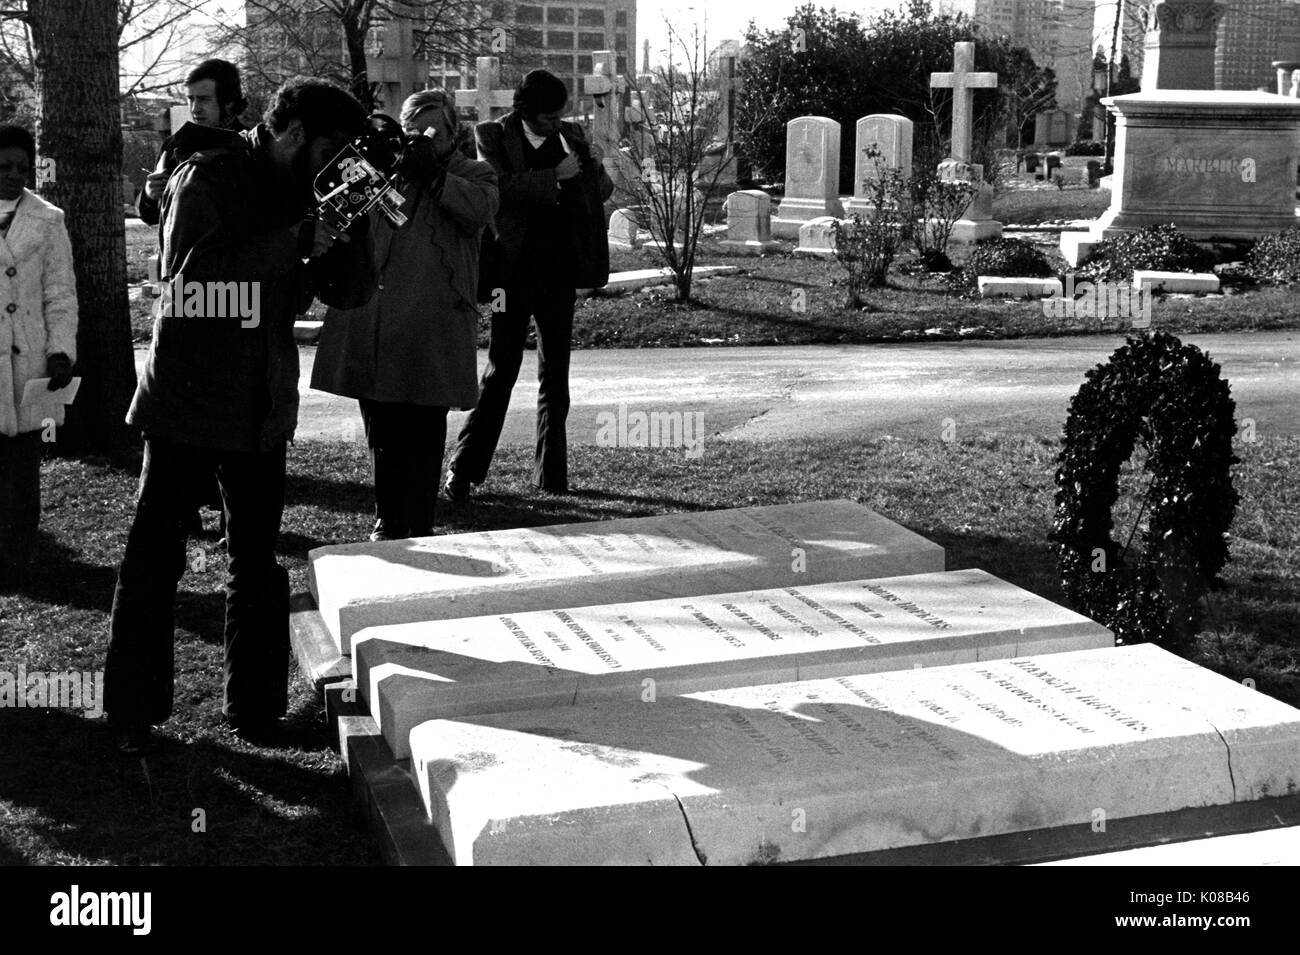 Photograph of cameraman photographing Johns Hopkins grave in Greenmount Cemetery, on 100th anniversary of Hopkins death, Baltimore, Maryland, December 24, 1973. Stock Photo